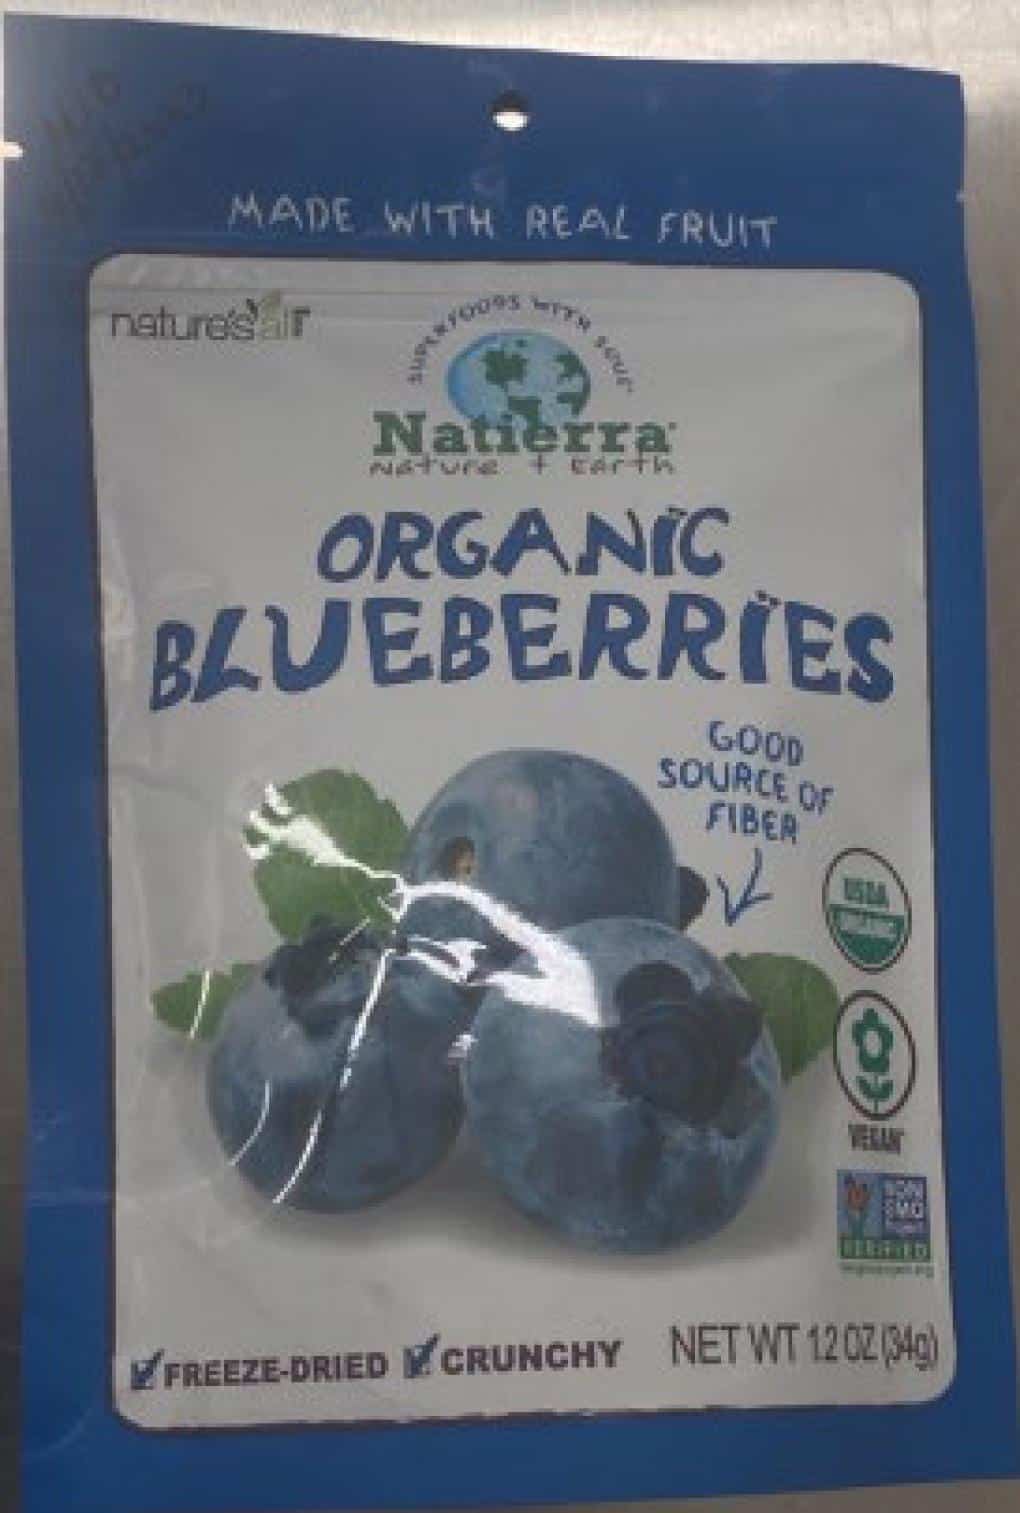 Natierra Organic Freeze-Dried Blueberries Recalled for Lead Poisoning Risk